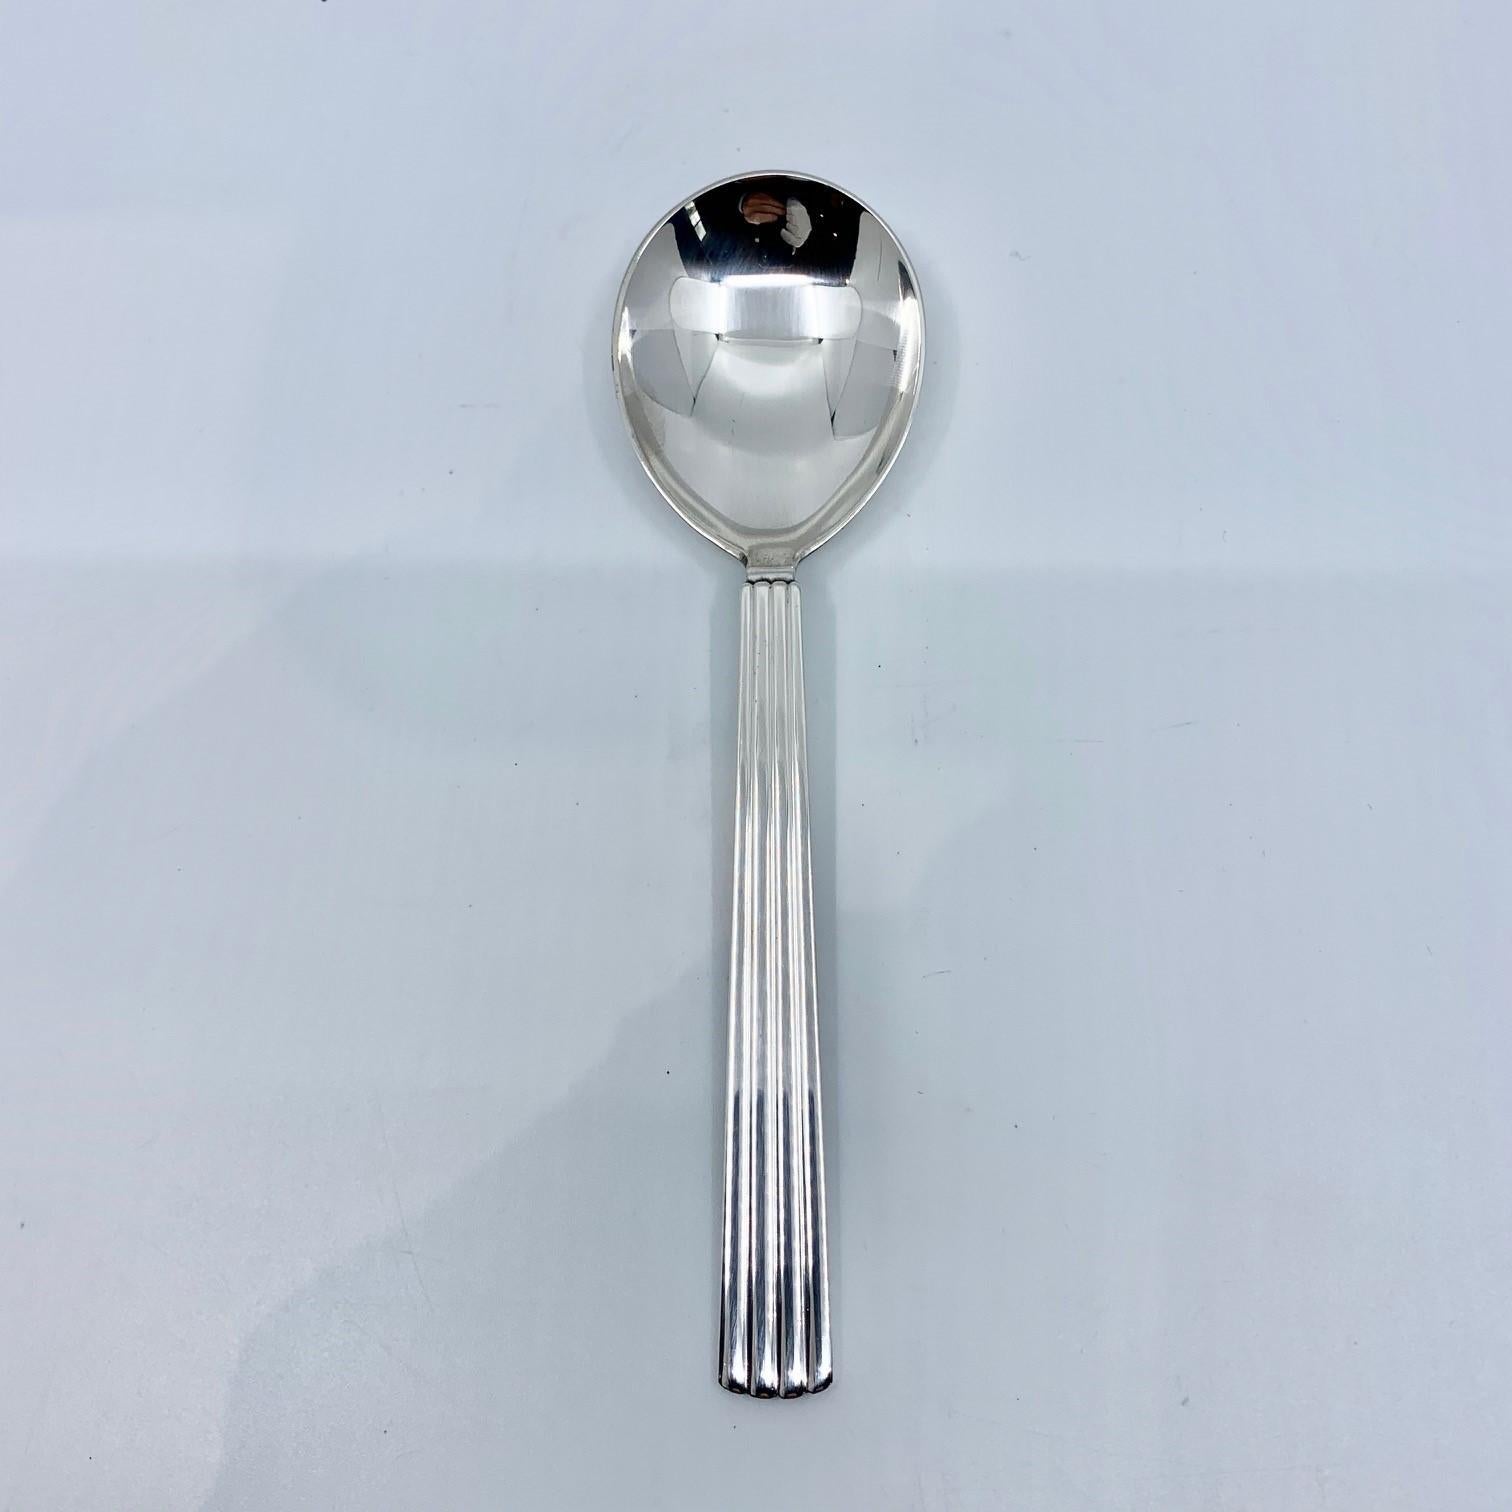 A Georg Jensen sterling silver jam spoon, item 163 in the Bernadotte pattern, design #9 by Sigvard Bernadotte from 1939.

Additional information:
Material: Sterling silver
Style: 
Hallmarks: With Georg Jensen hallmark, made in Denmark.
Dimension: 